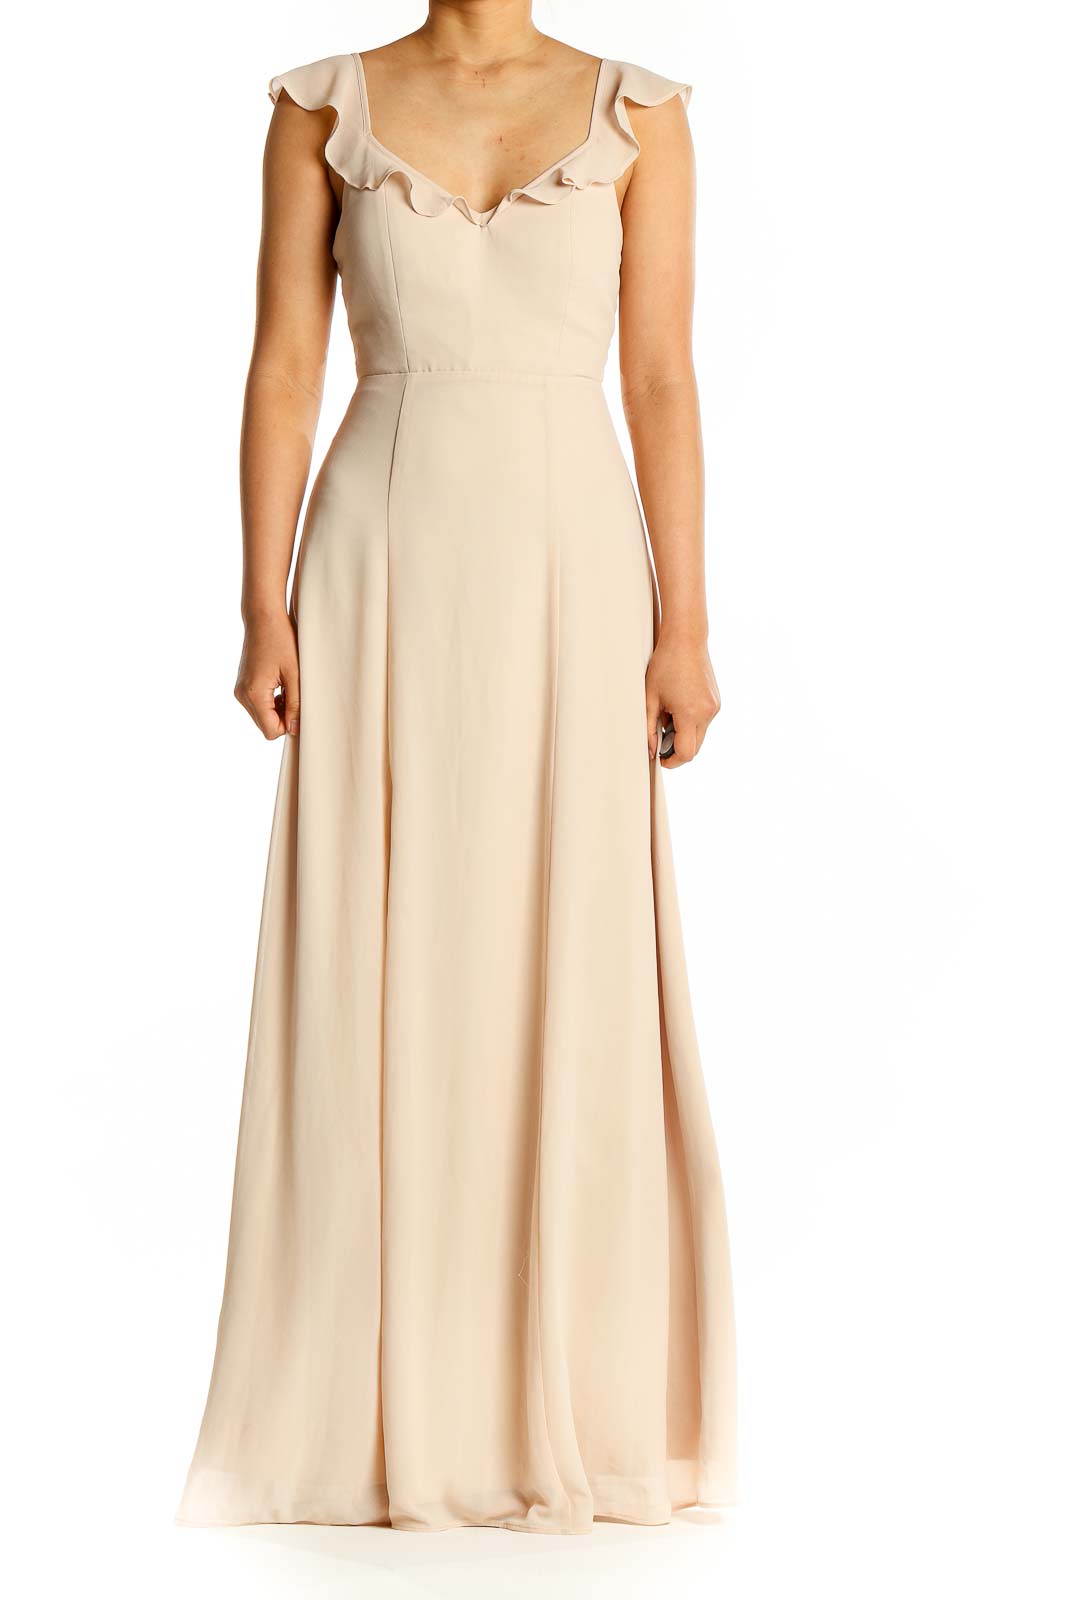 Beige Sleeveless Evening Gown Front